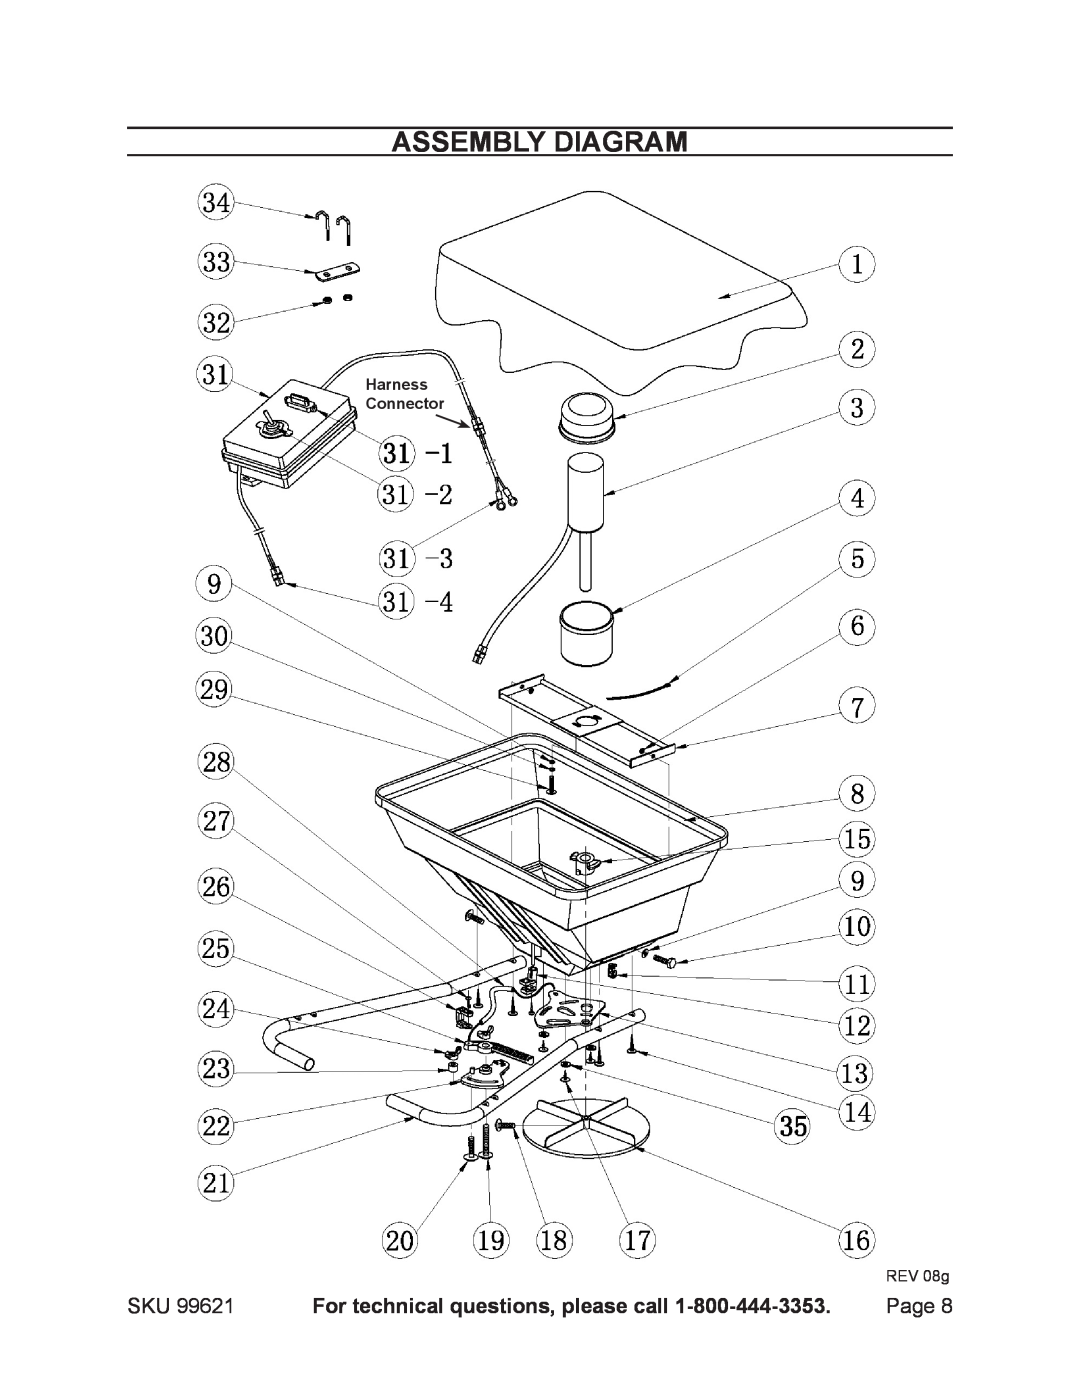 Harbor Freight Tools 99621 manual Assembly Diagram, For technical questions, please call, Harness Connector, REV 08g 